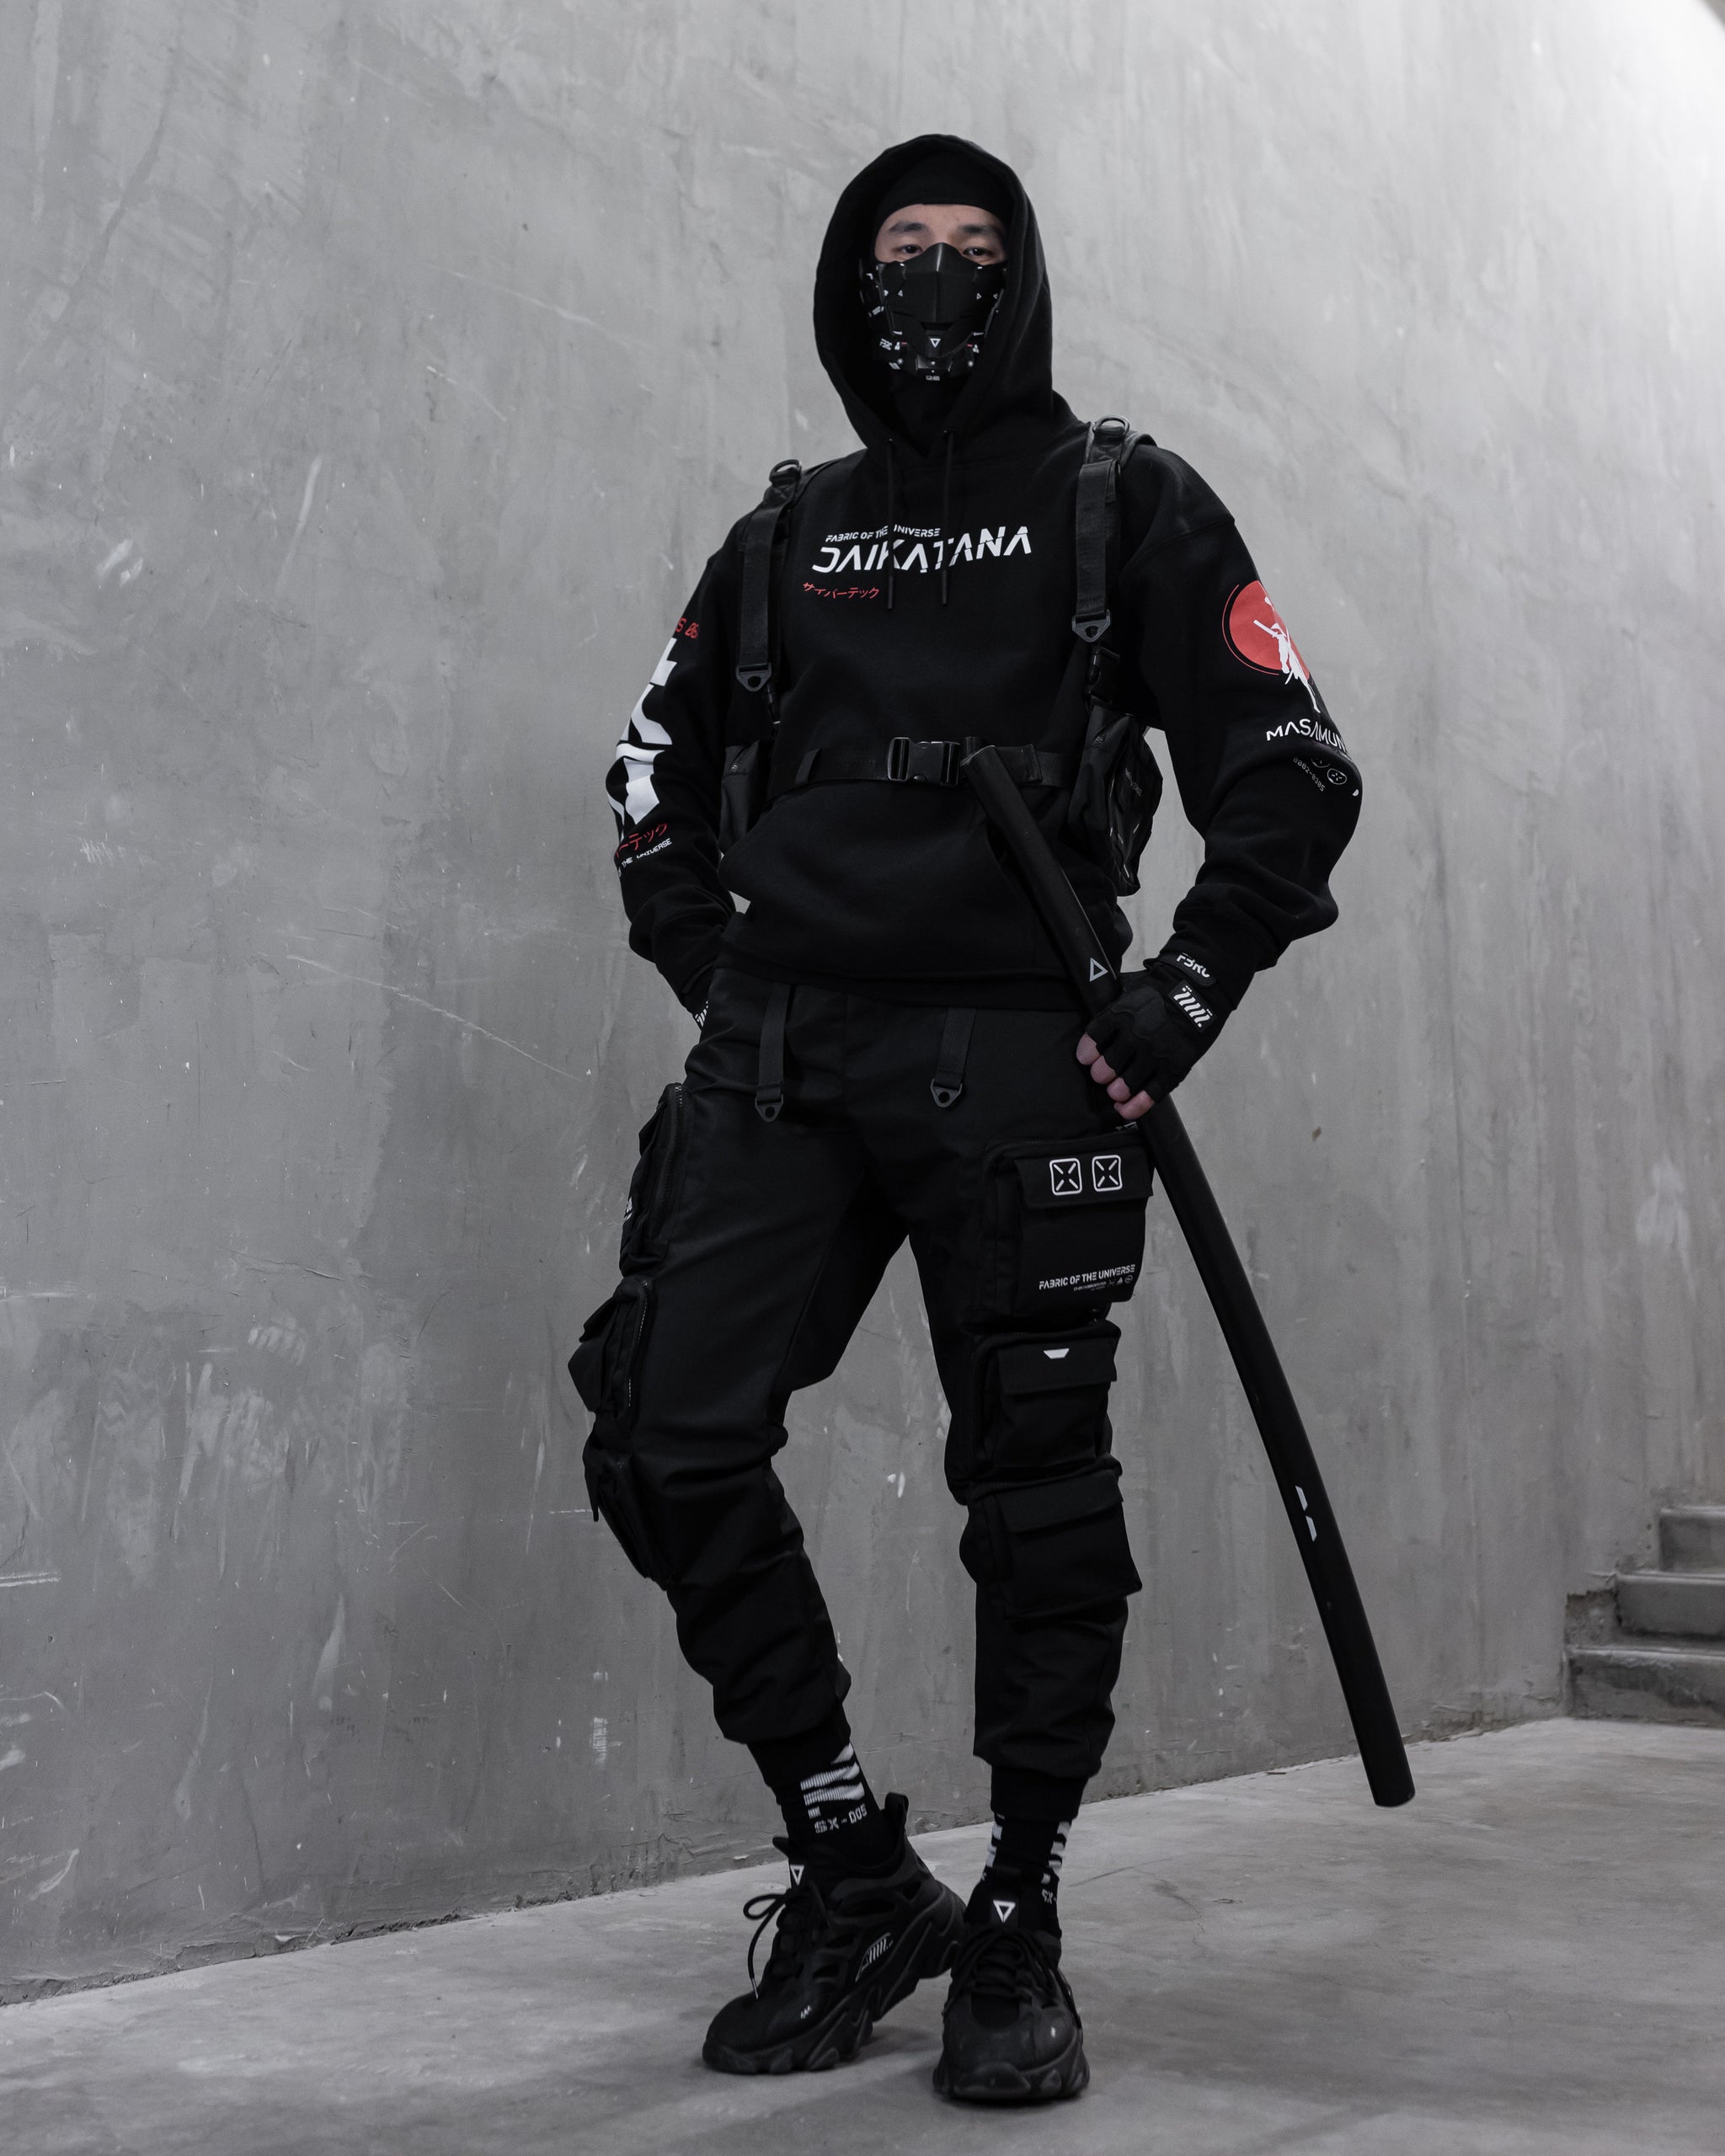 Fabric of the universe still makes the best masks. : r/TechWear